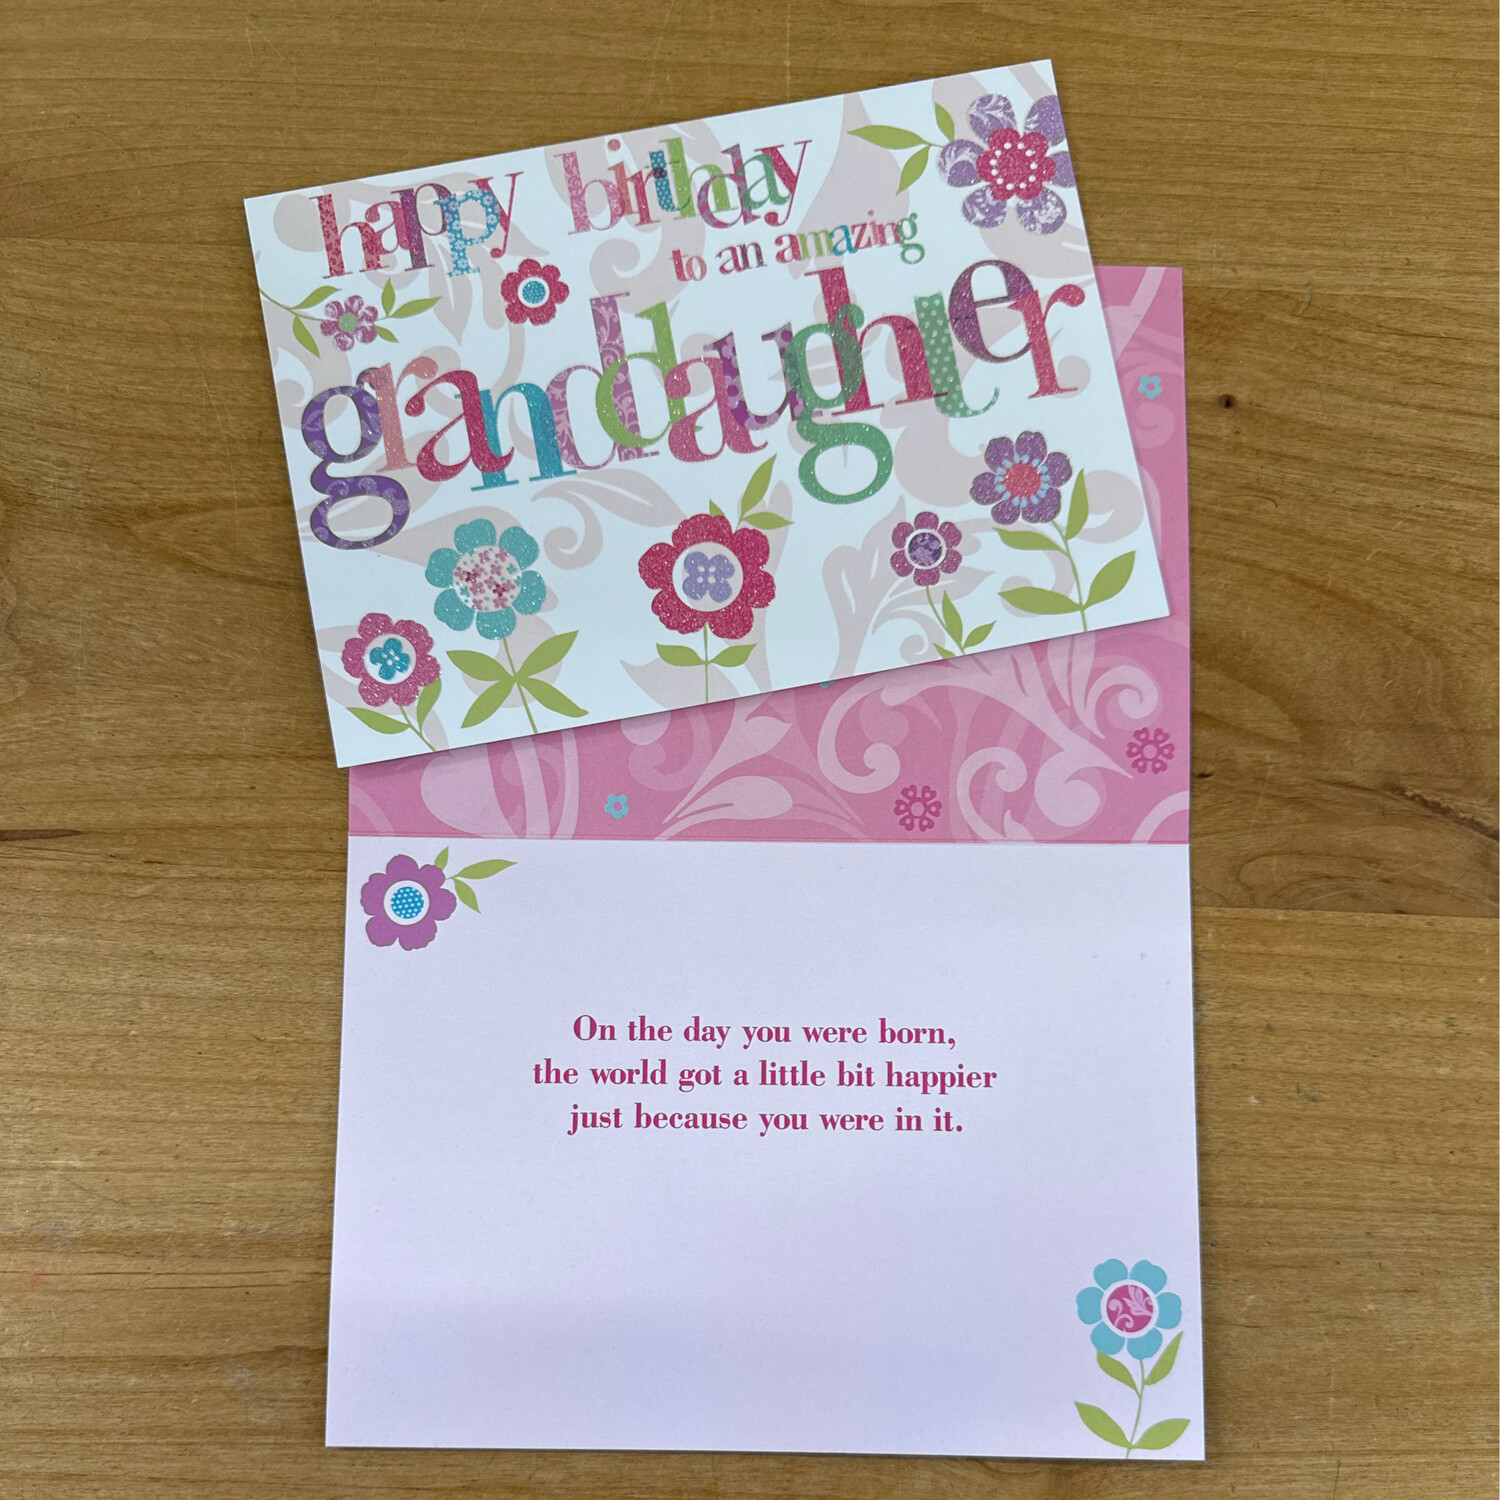 Granddaughter Letters & Flowers Card